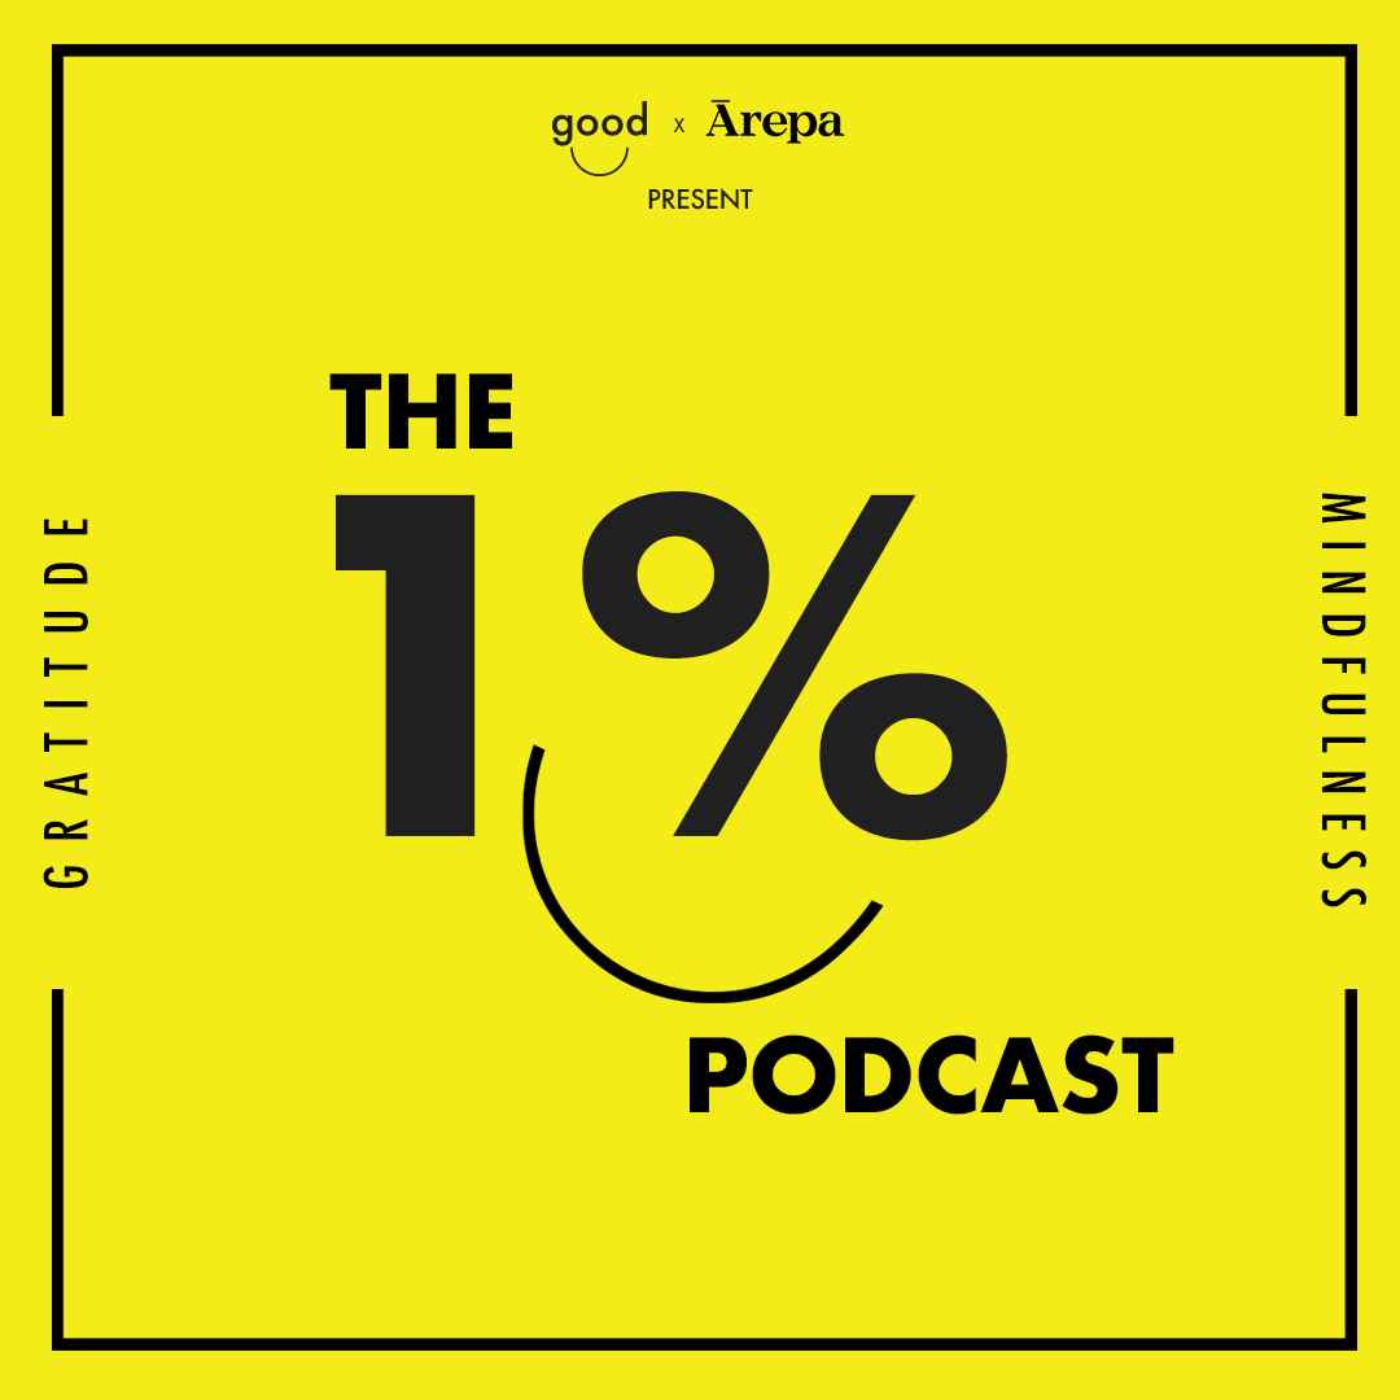 1% Pod - The best compliment I have ever received :)